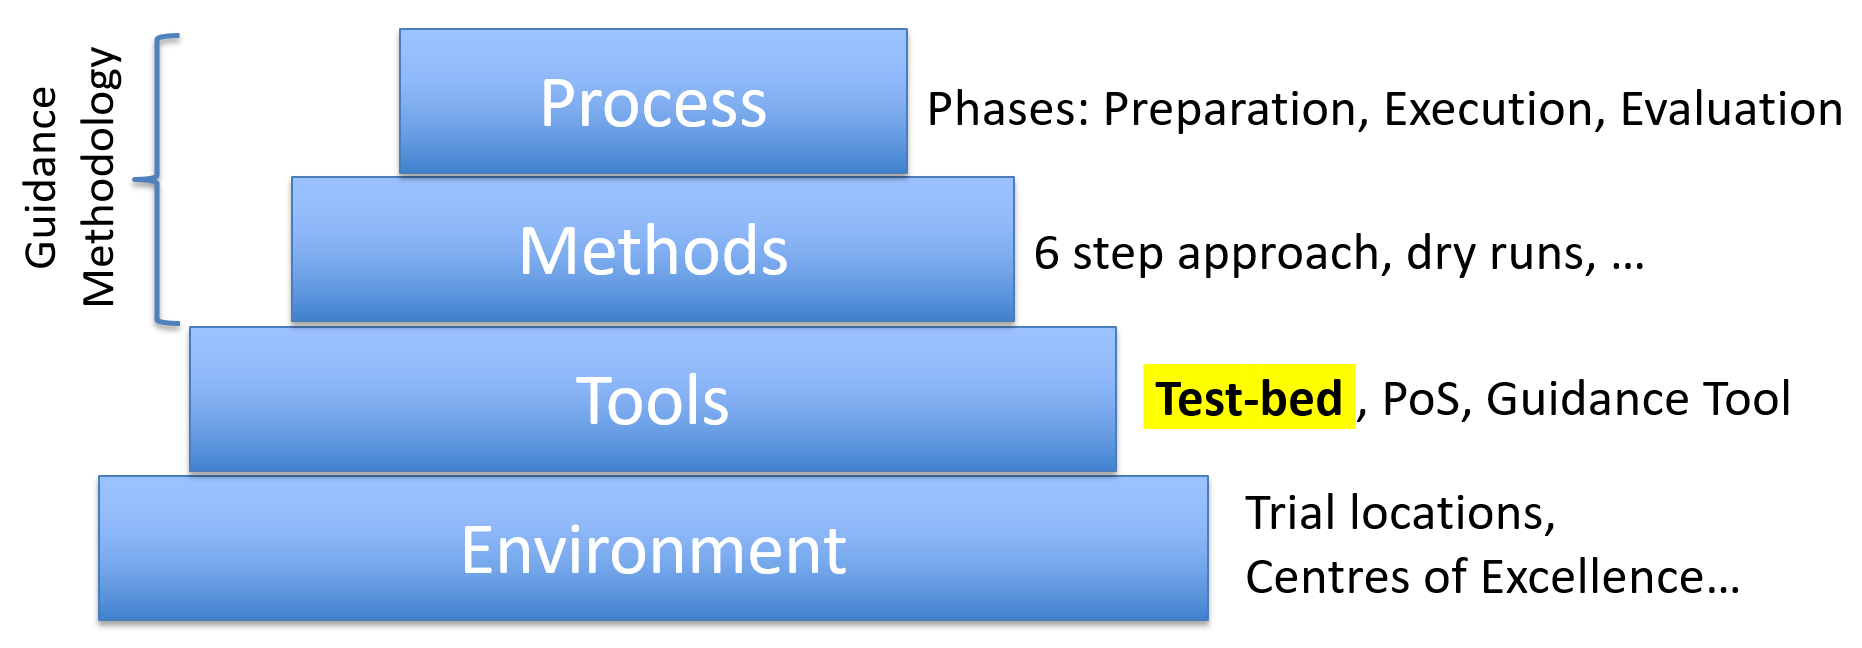 Process-Methods-Tools-Environment (PMTE) paradigm, where the TGM prescribes the Process and Methodology, supported by the Test-bed technical infrastructure (Tools).